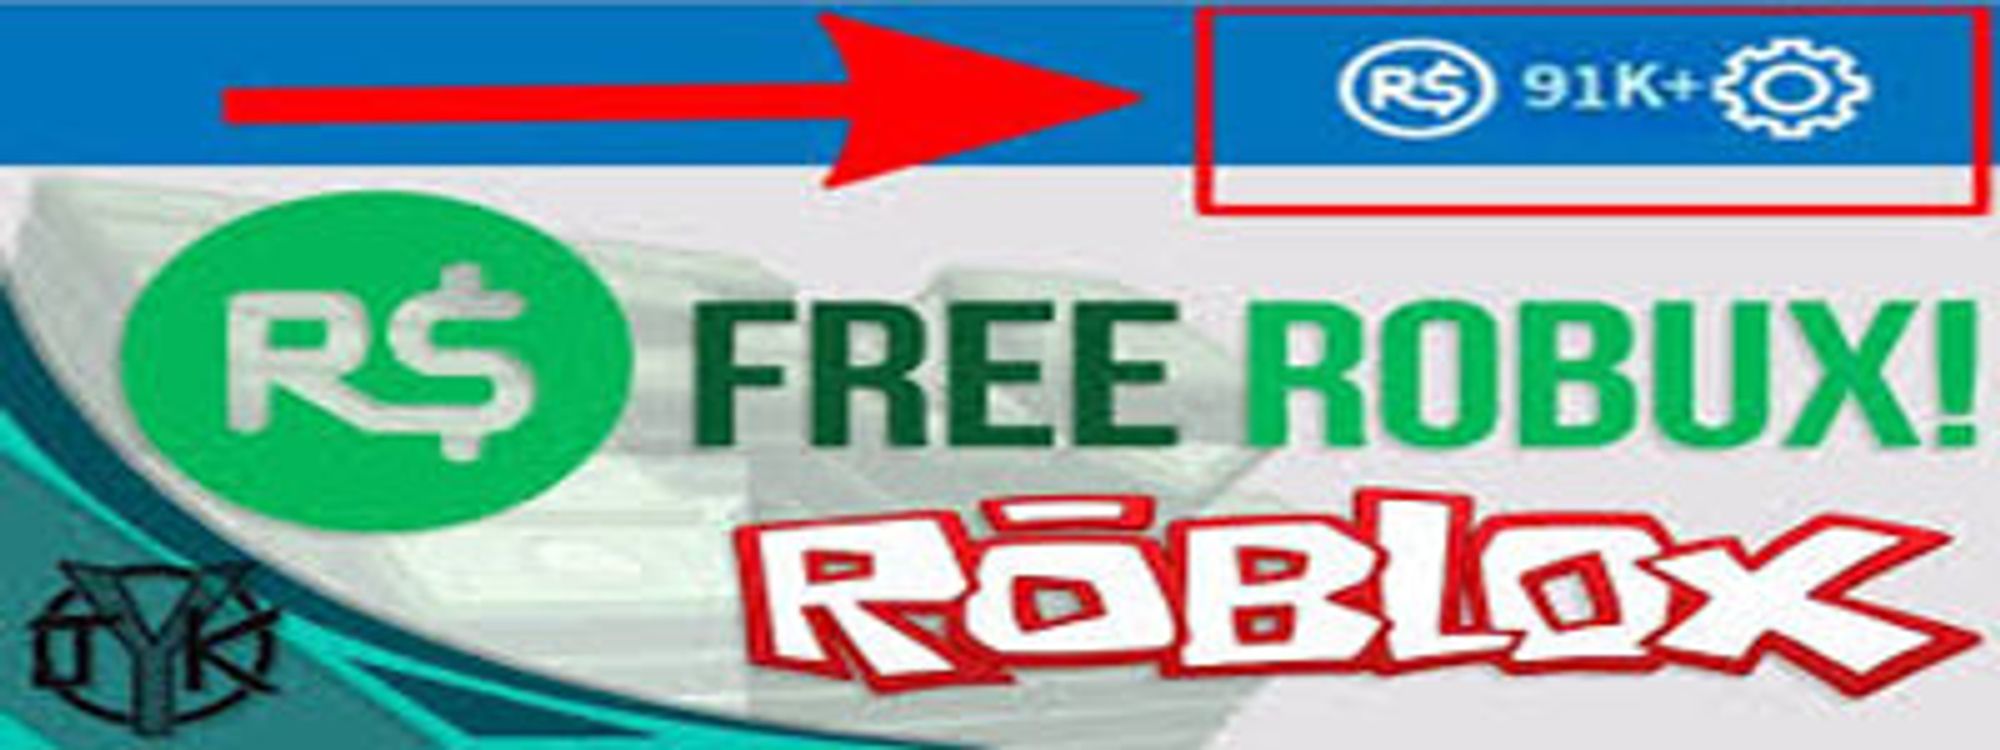 Roblox Robux Free Roblox Robux Codes With Skins Password Account 2020 - roblox znac profile robux for free add